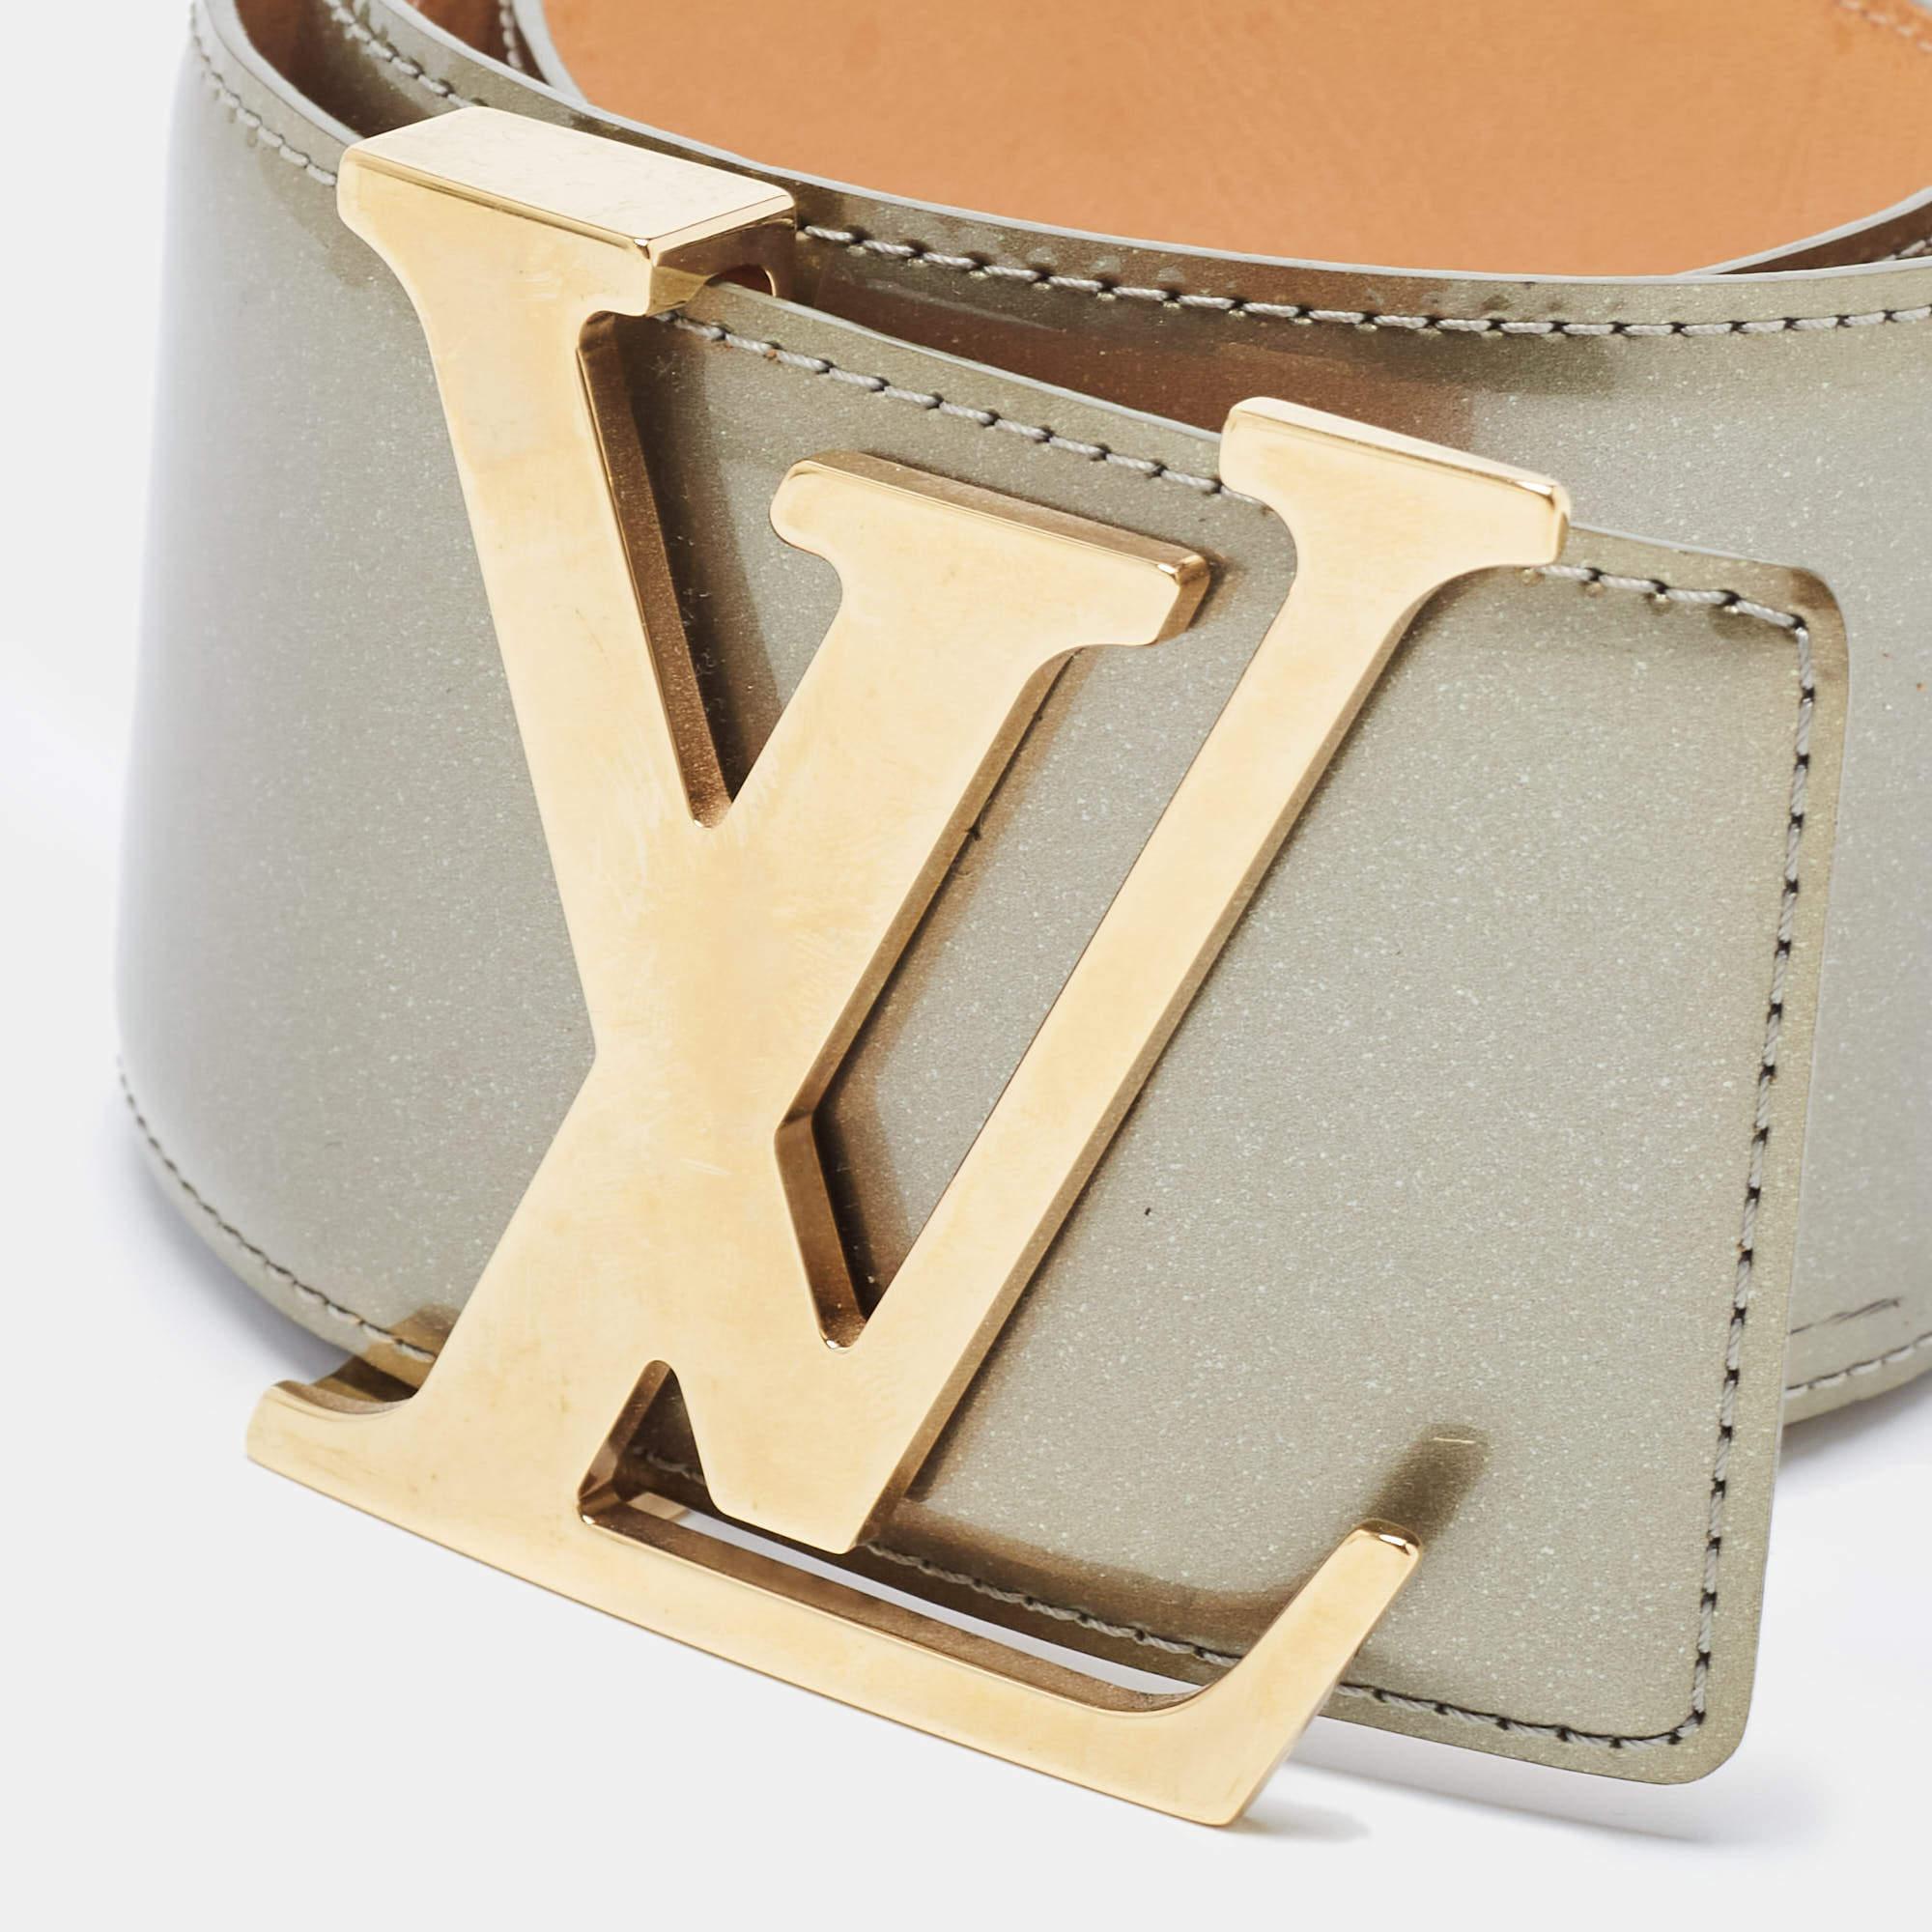 Grant your style with signature beauty and elegance as you accessorize with this gorgeous belt from Louis Vuitton. It is made from Vernis in green and features the LV buckle.

